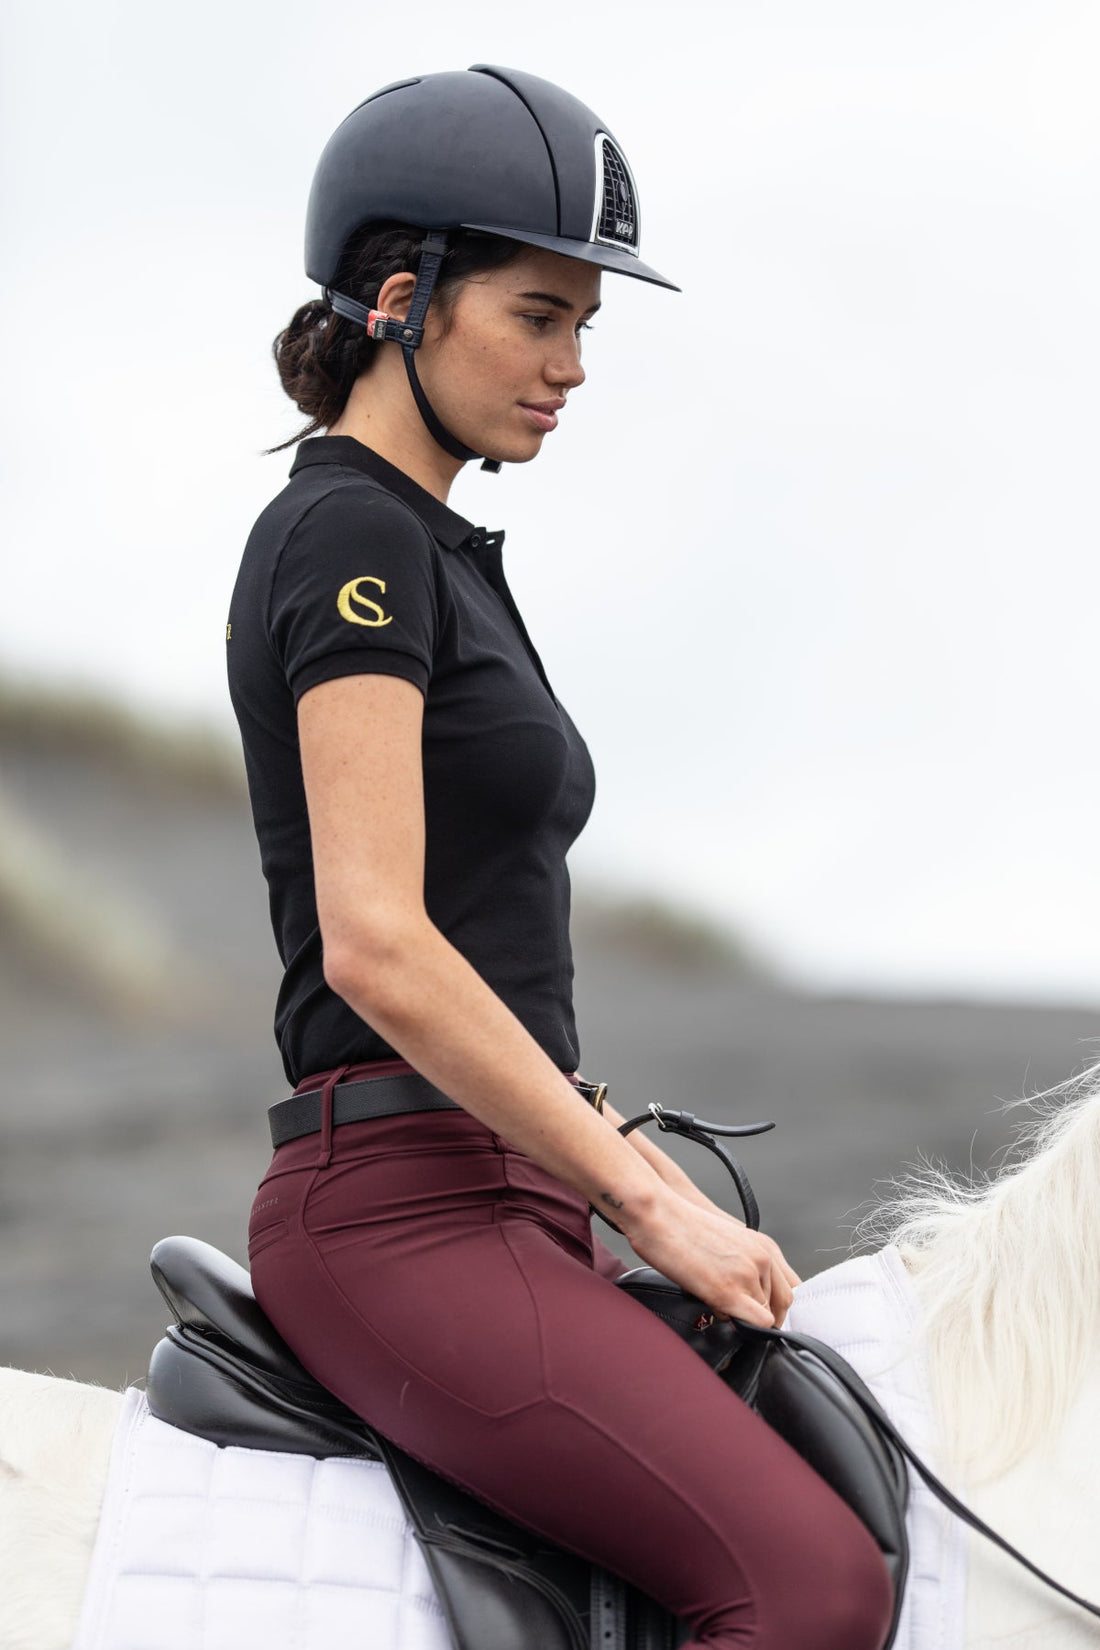 Women's Equestrian Clothing, Ladies Horse Riding Clothes & Outfits